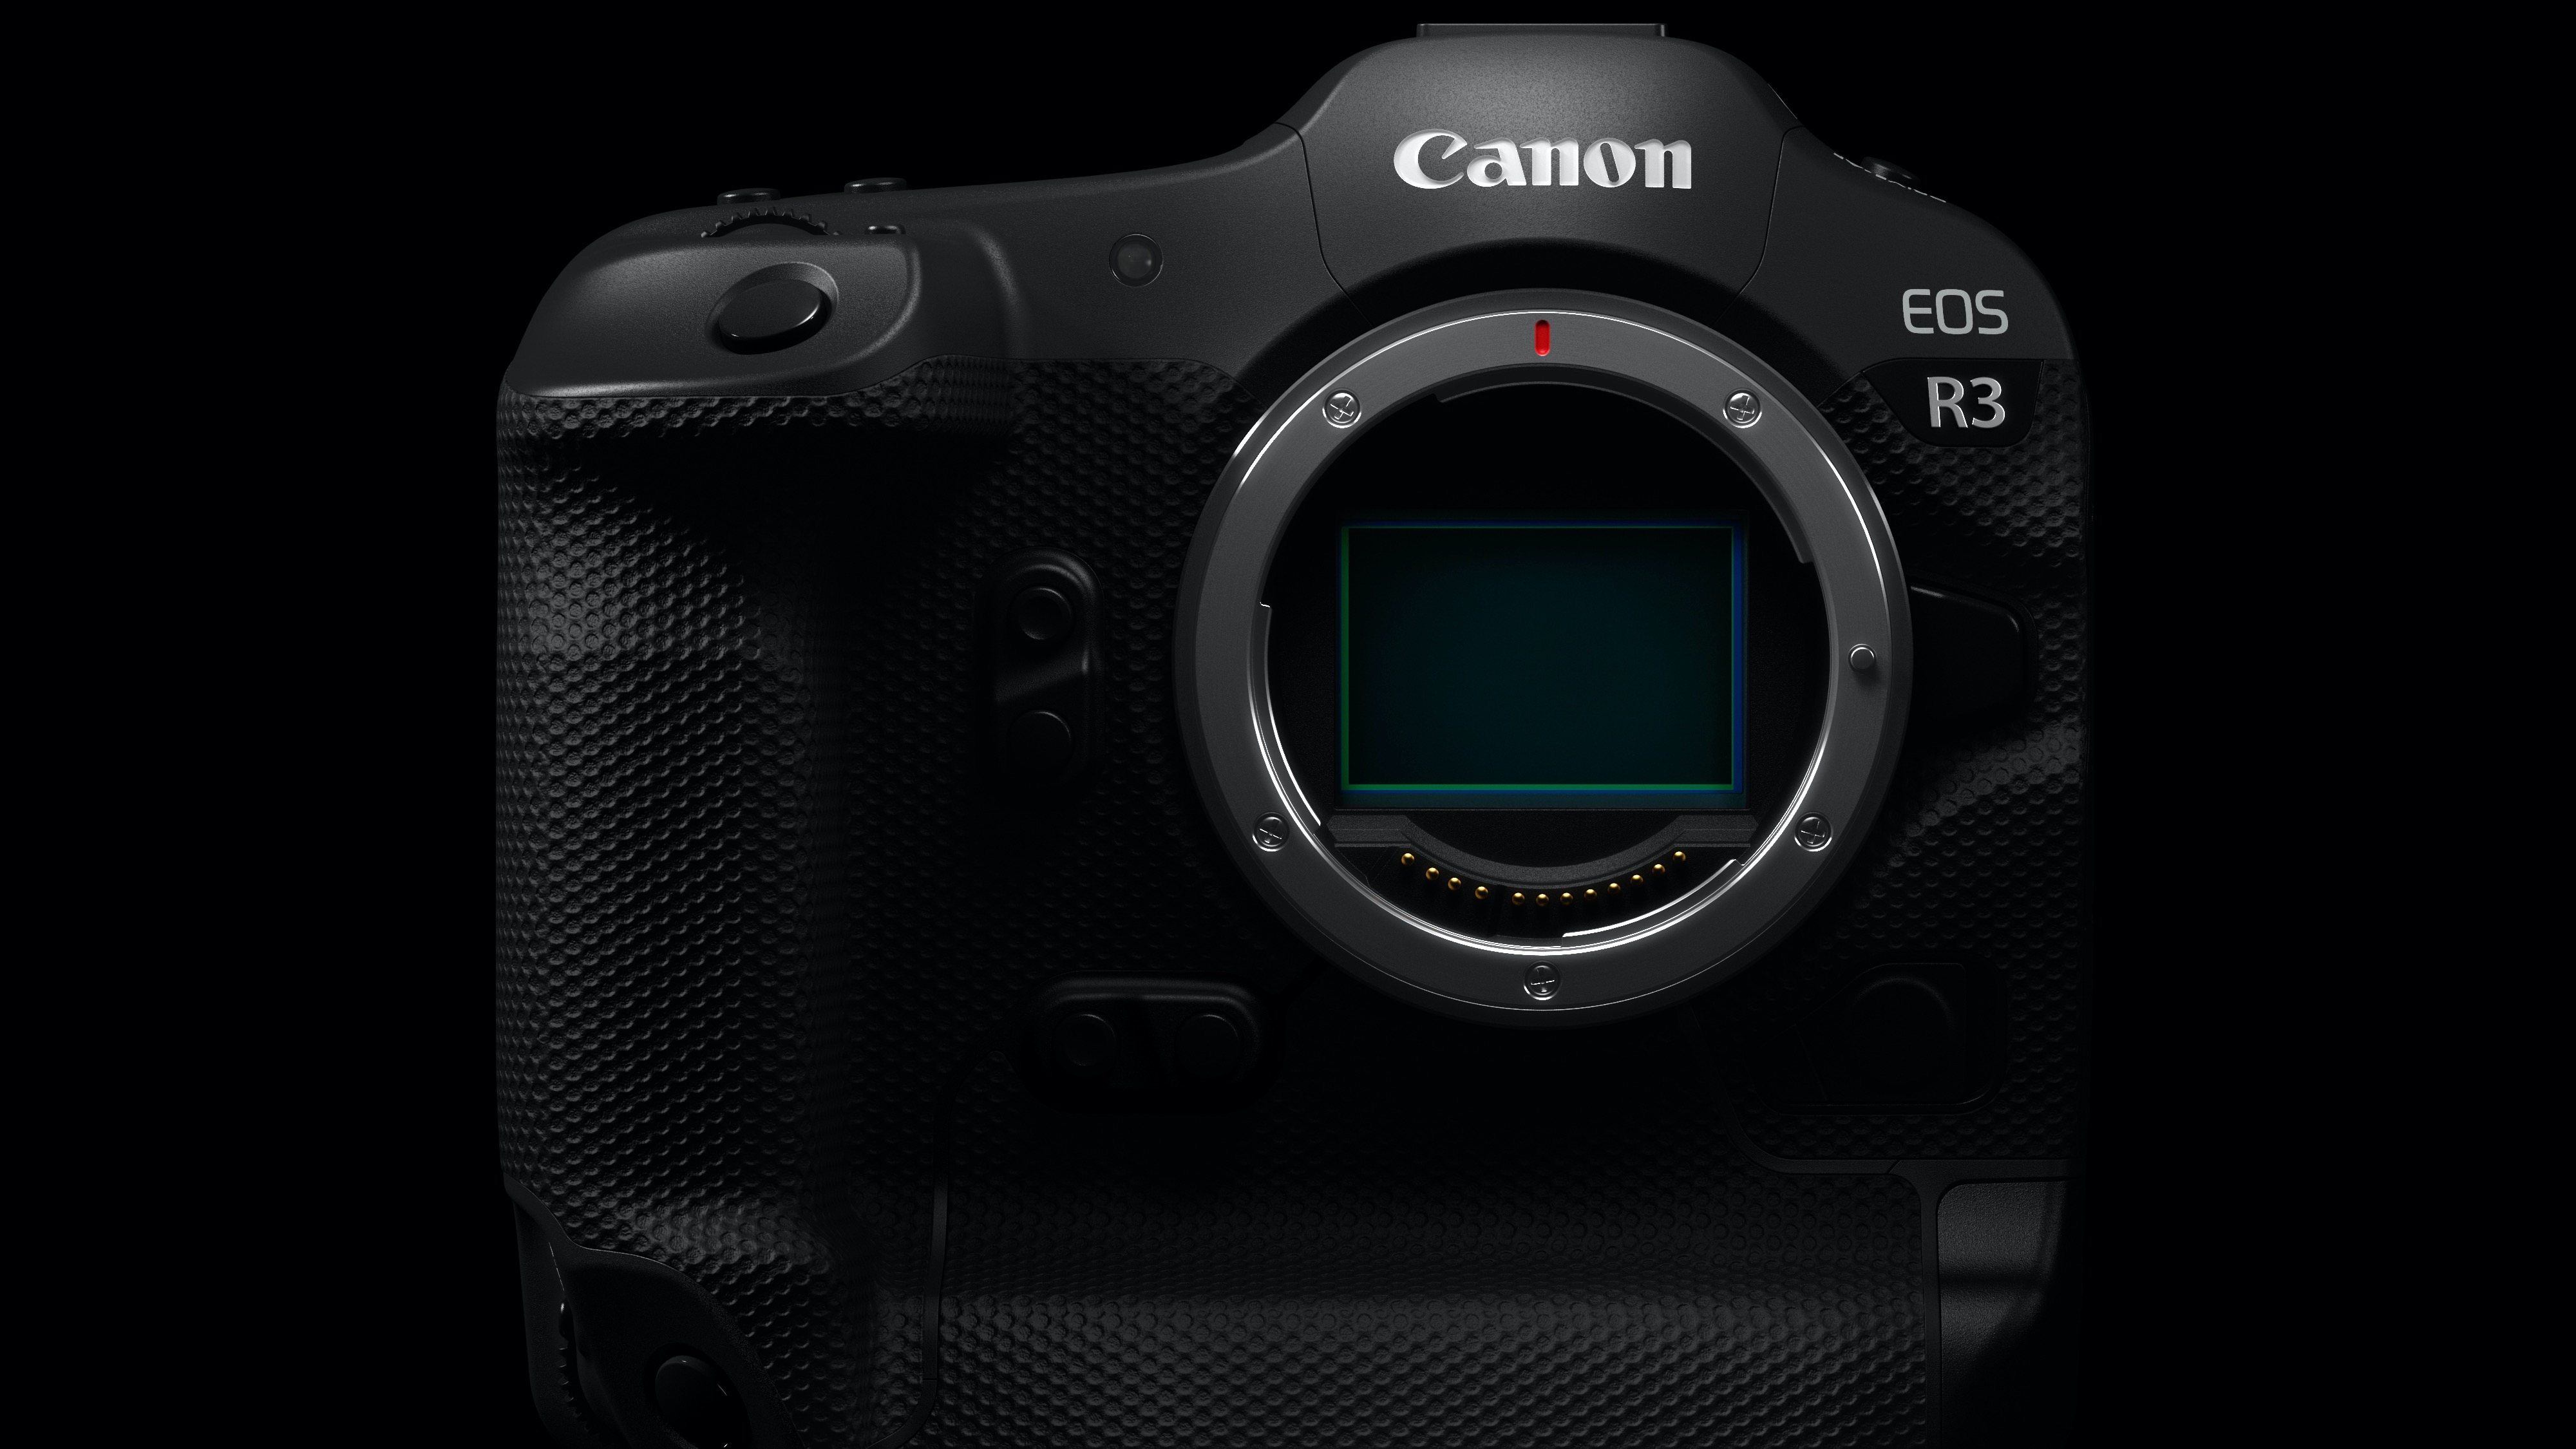 First Canon EOS R3 Olympics photos appear to reveal its resolution